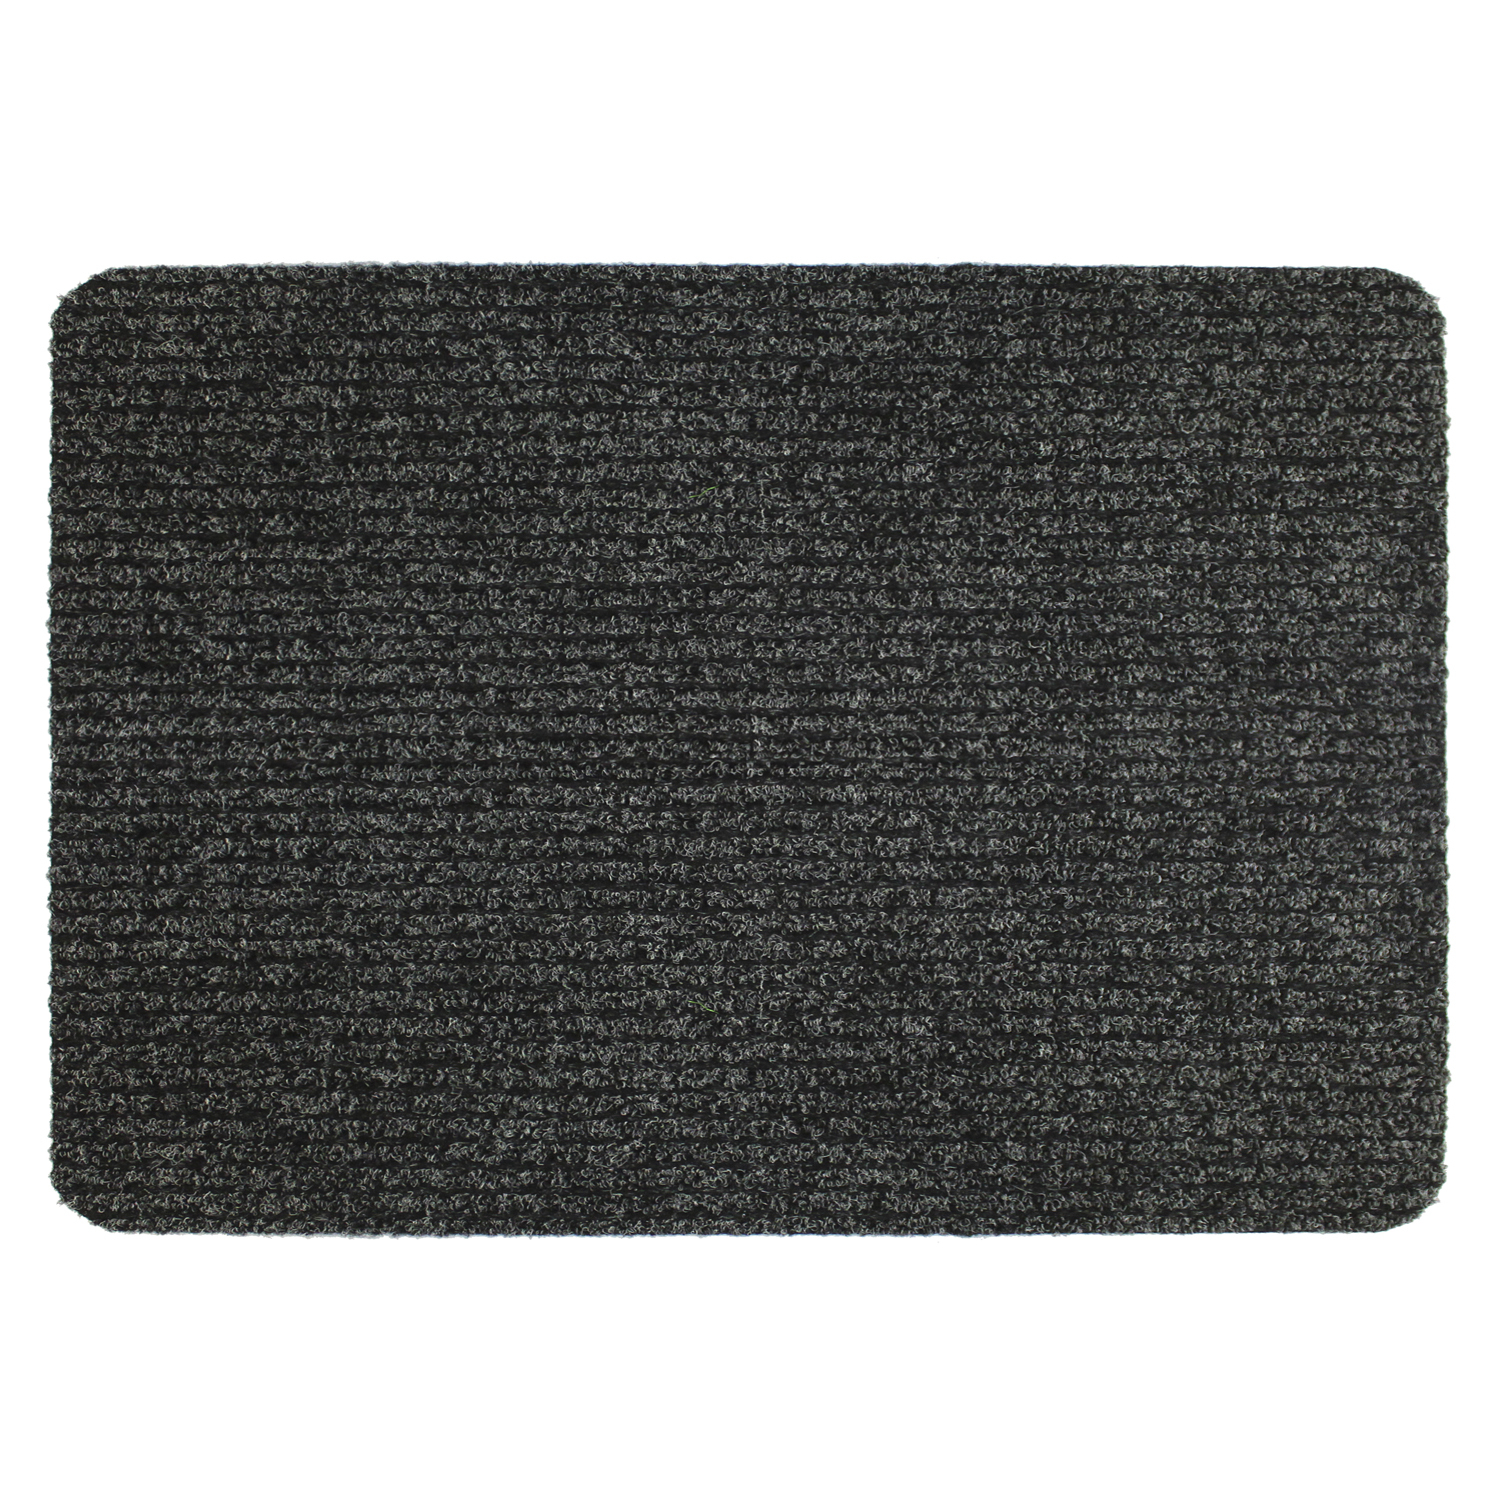 Single My Home Juno Large Ribbed Doormat 80 x 50cm in Assorted styles Image 2